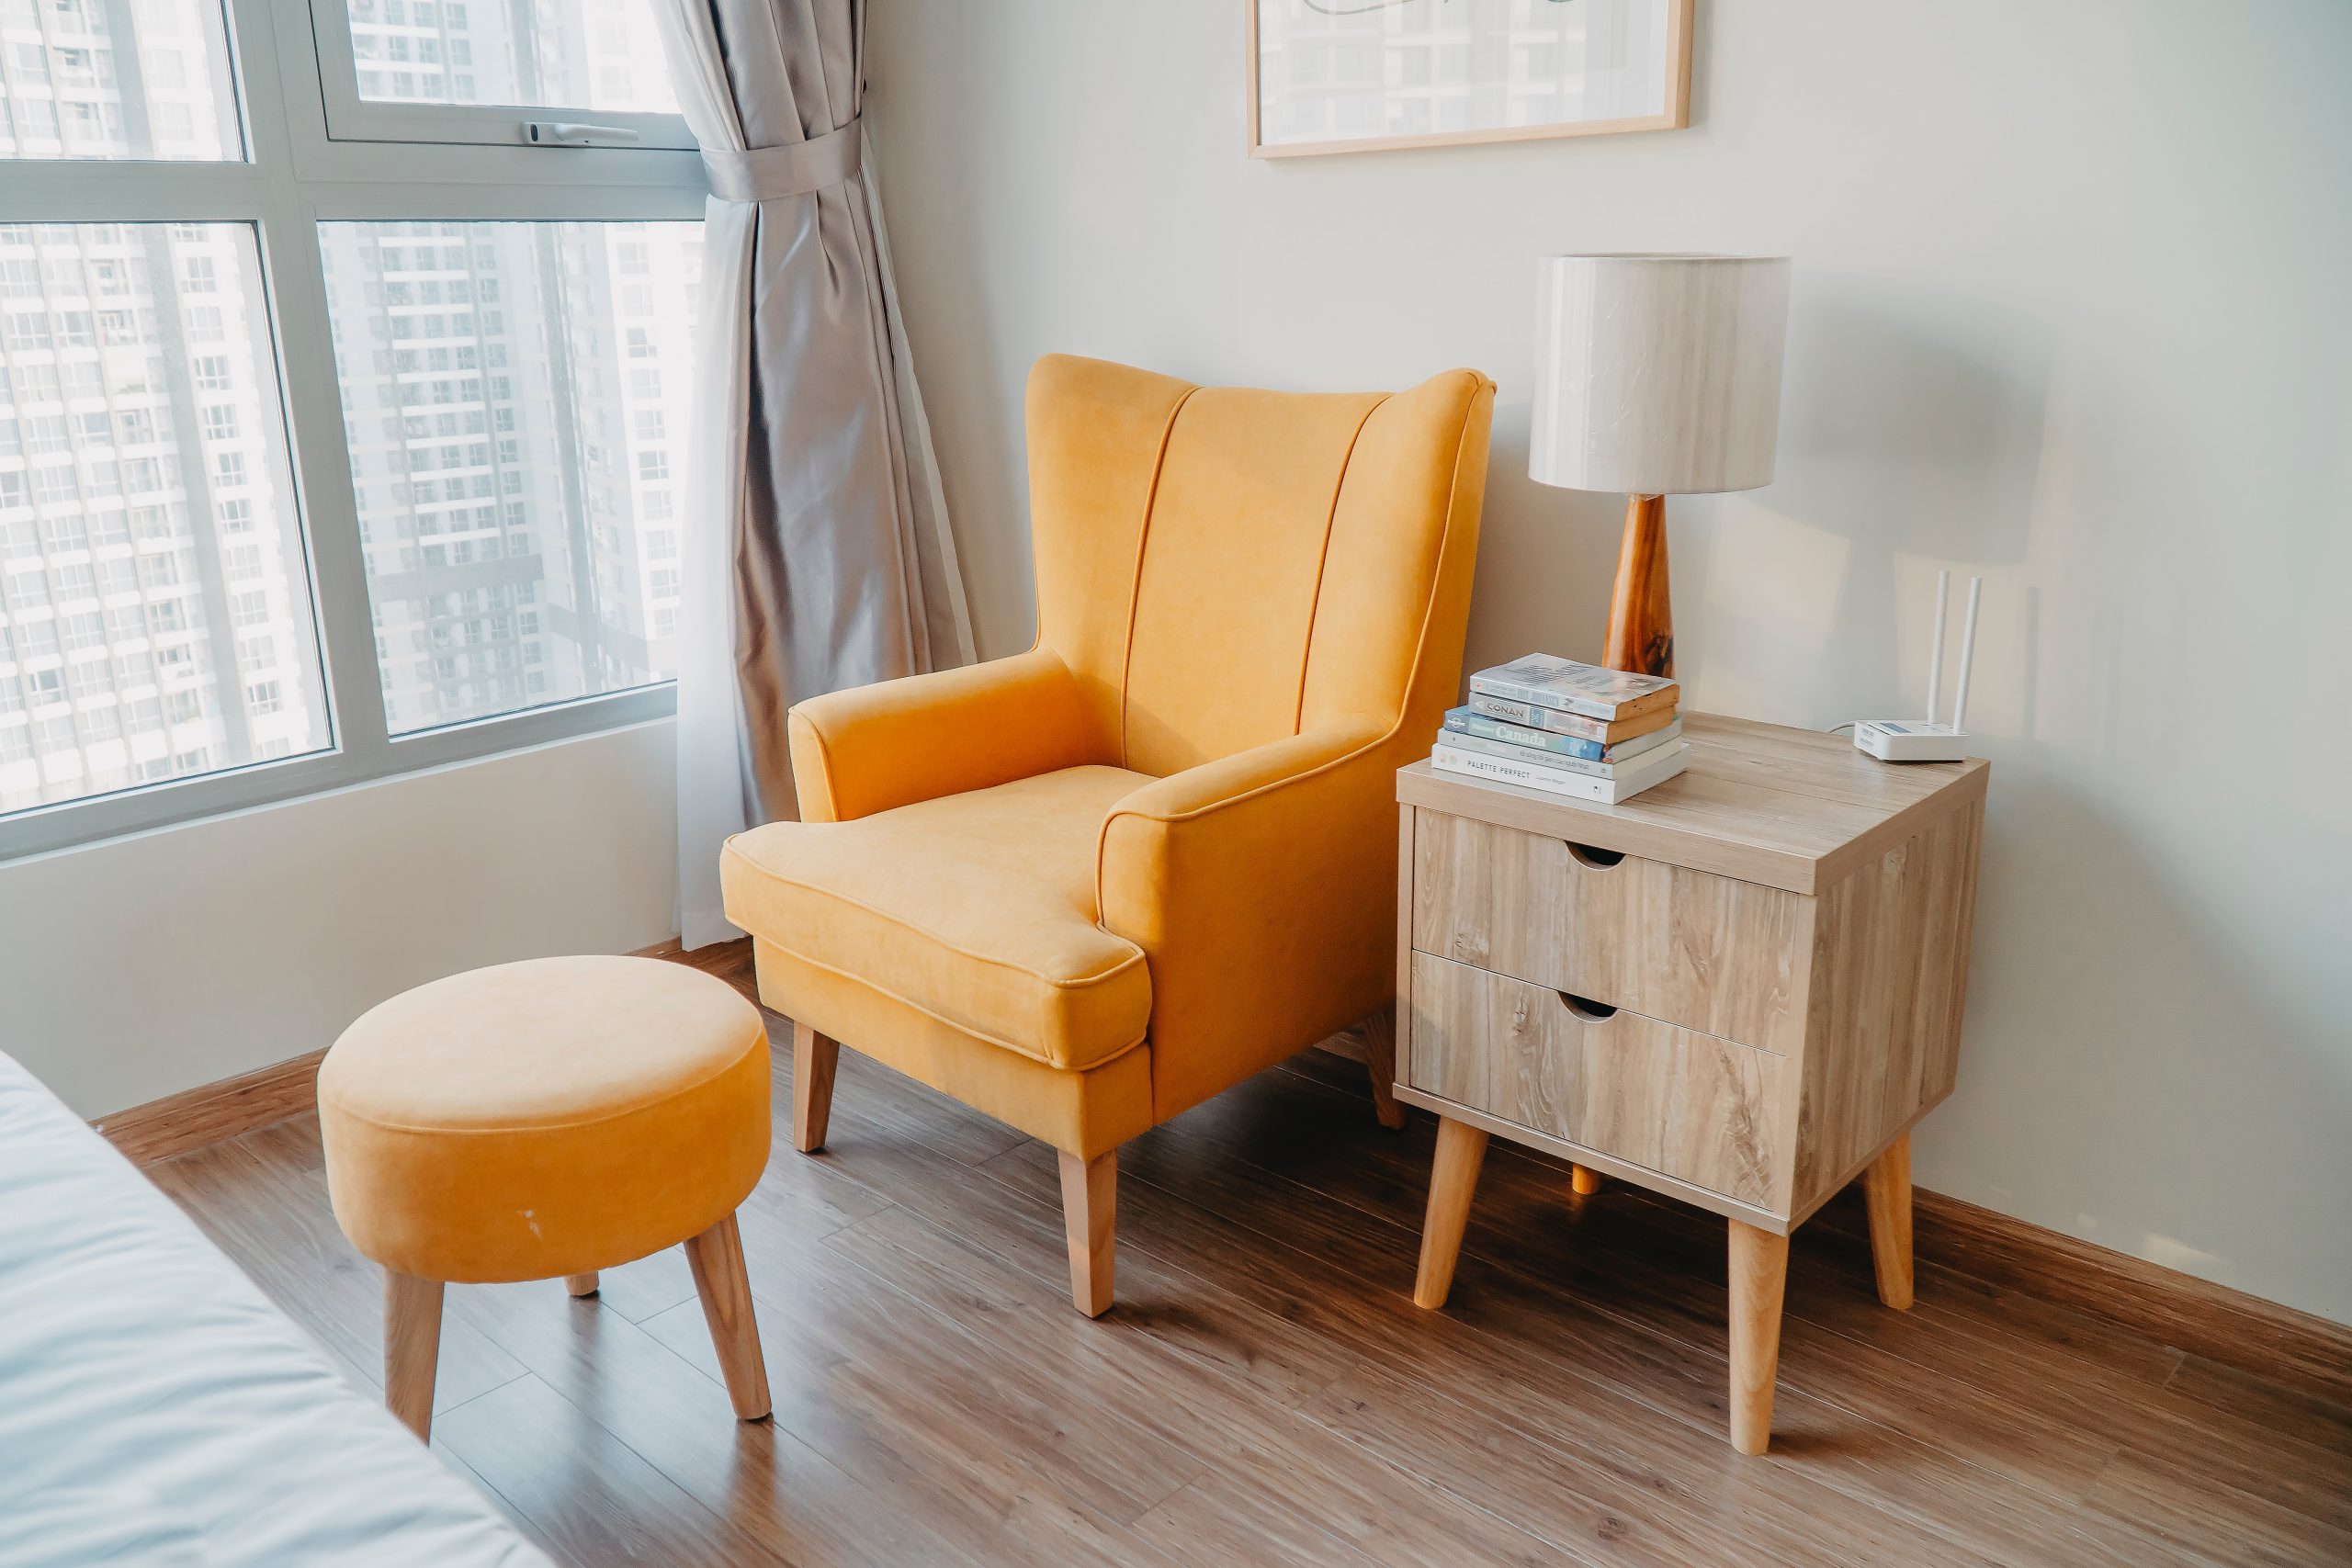 Yellow armchair and wooden side table